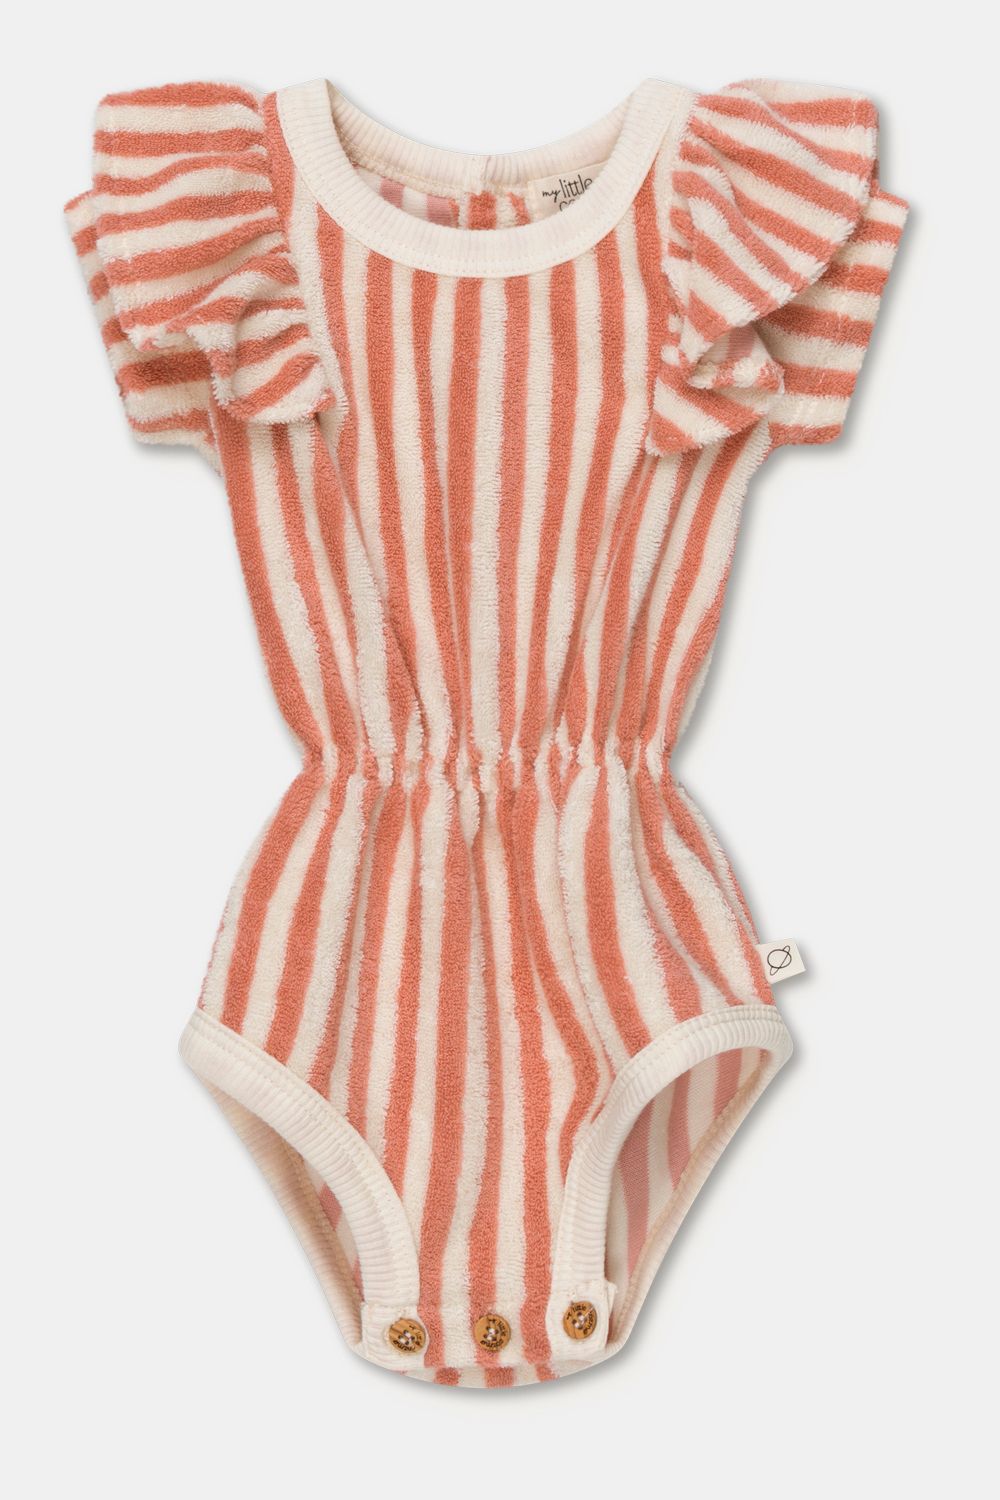 MY LITTLE COZMO TOWELING STRIPE BABY ROMPER - CORAL